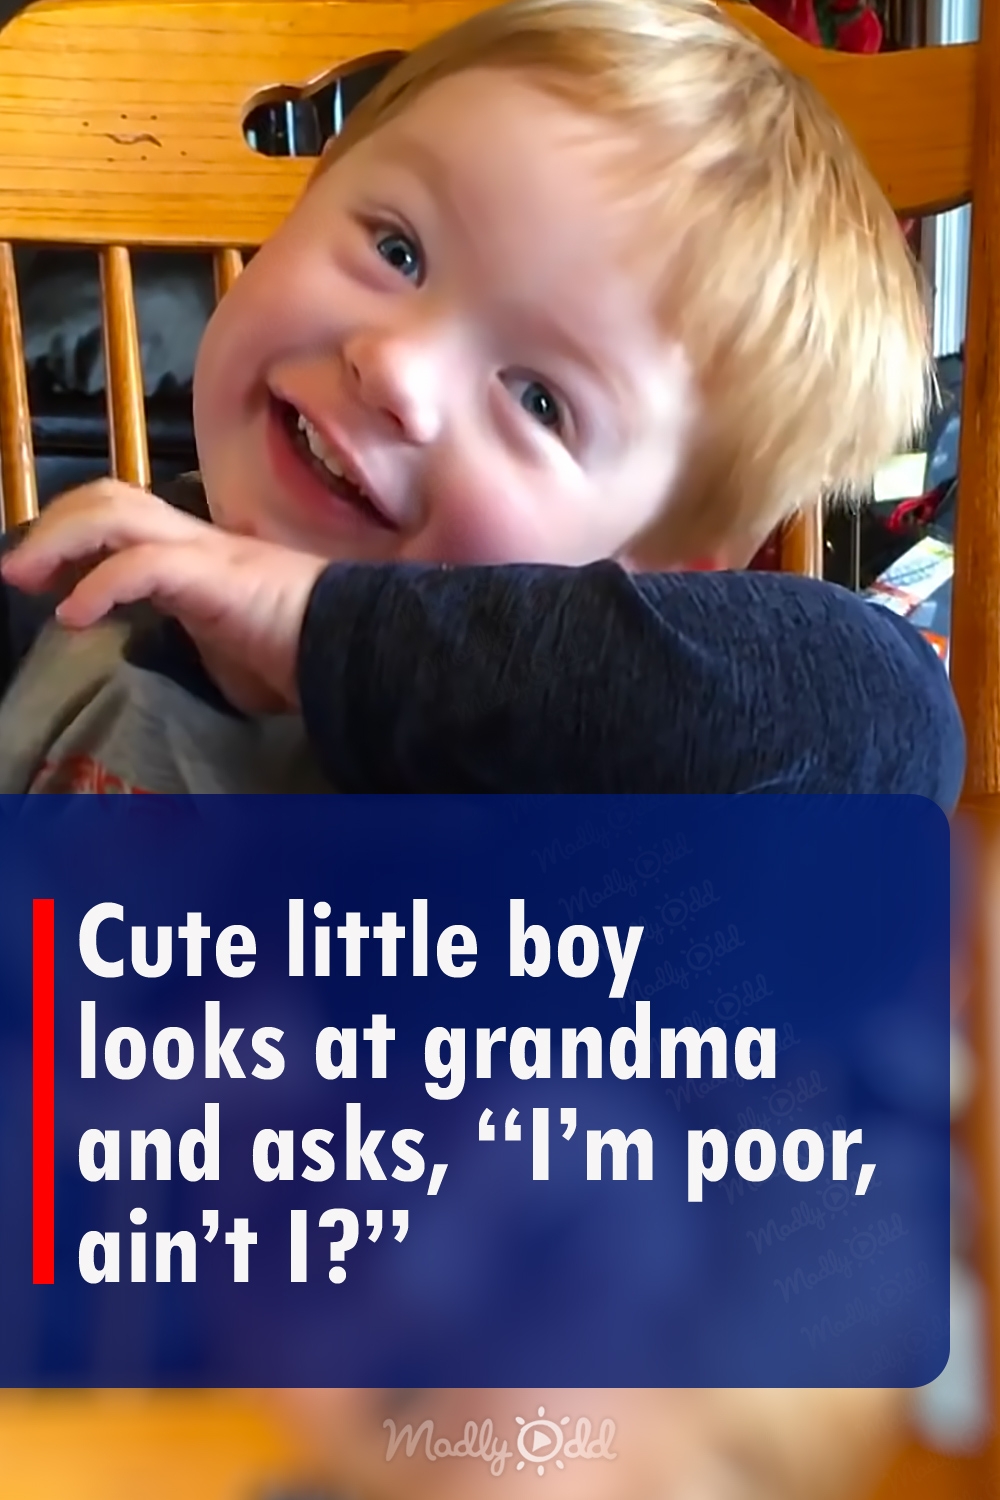 Cute little boy looks at grandma and asks, “I’m poor, ain’t I?”